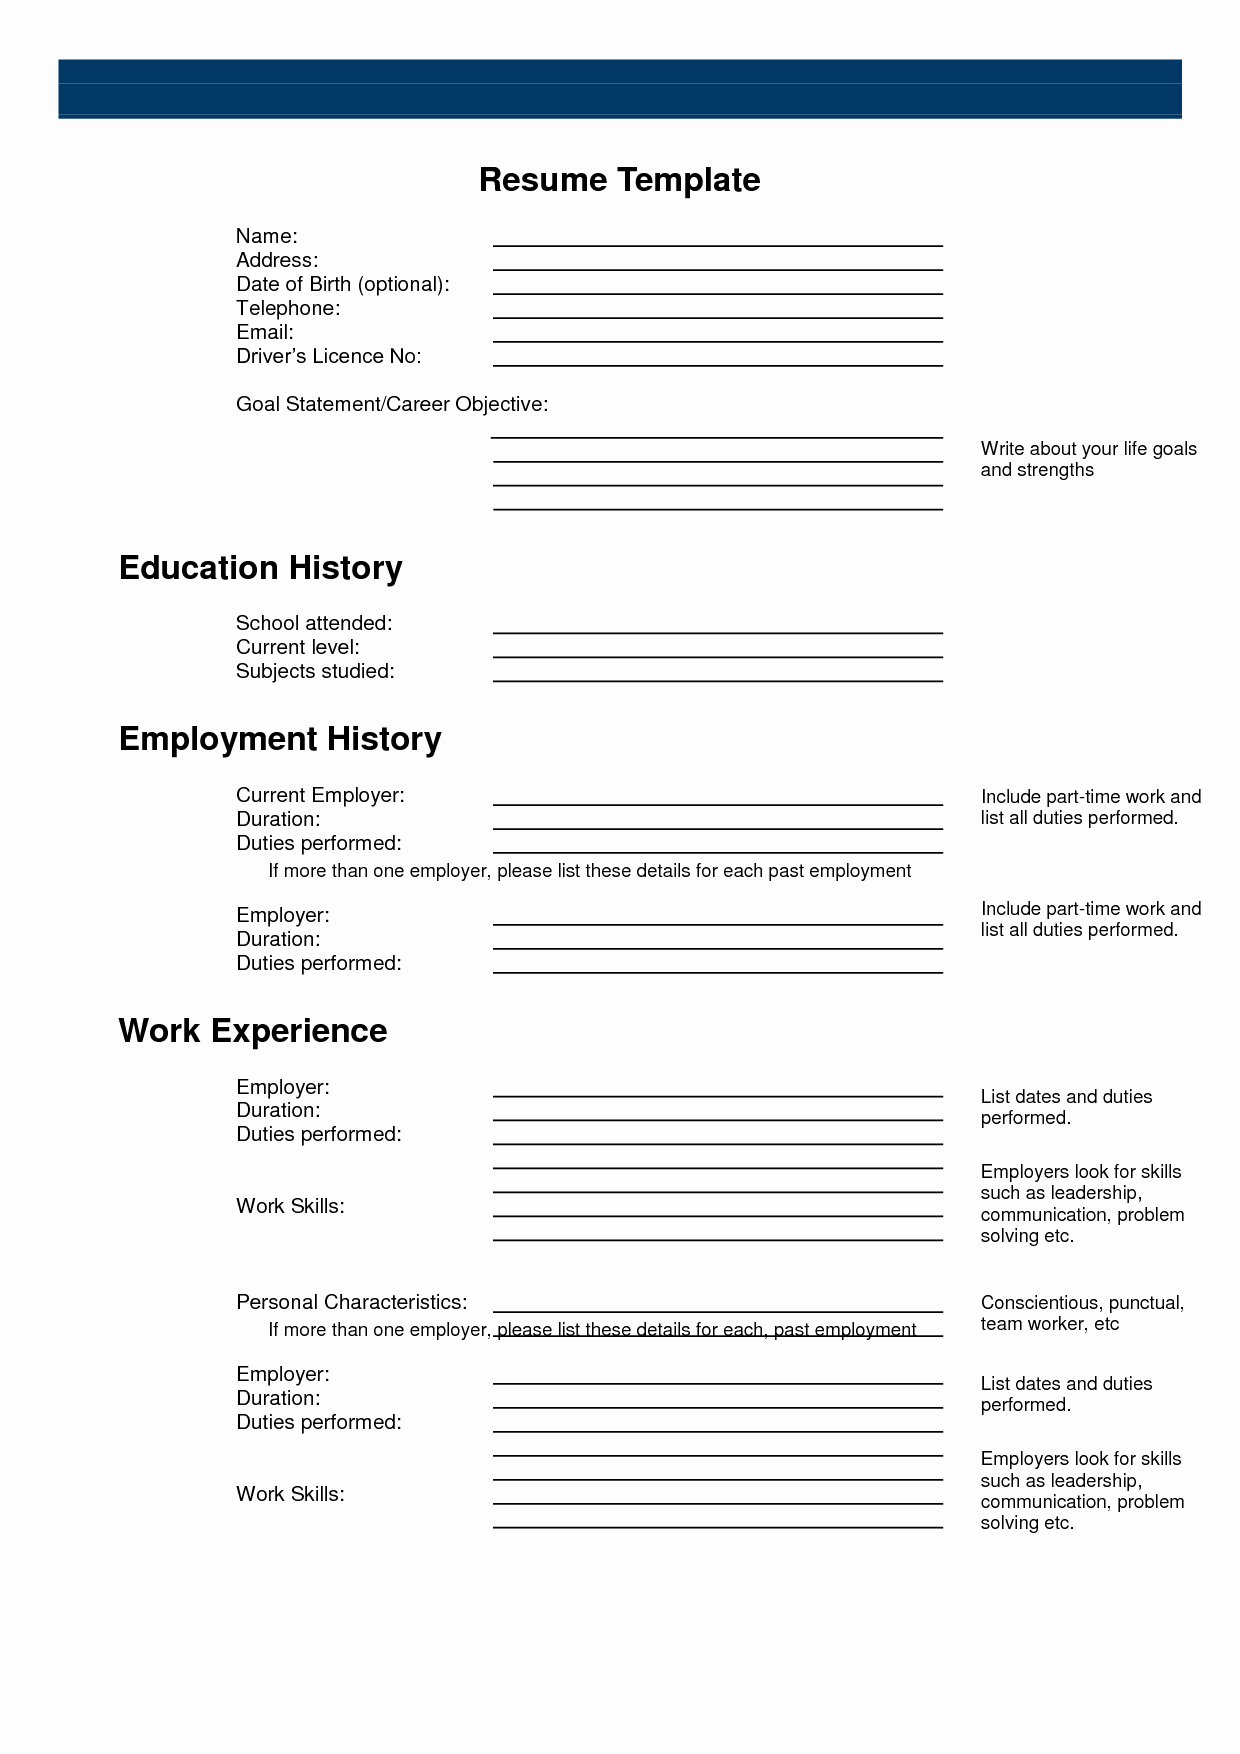 Free Printable Fill In The Blank Resume Templates Of Resume Forms - Free Printable Blank Resume